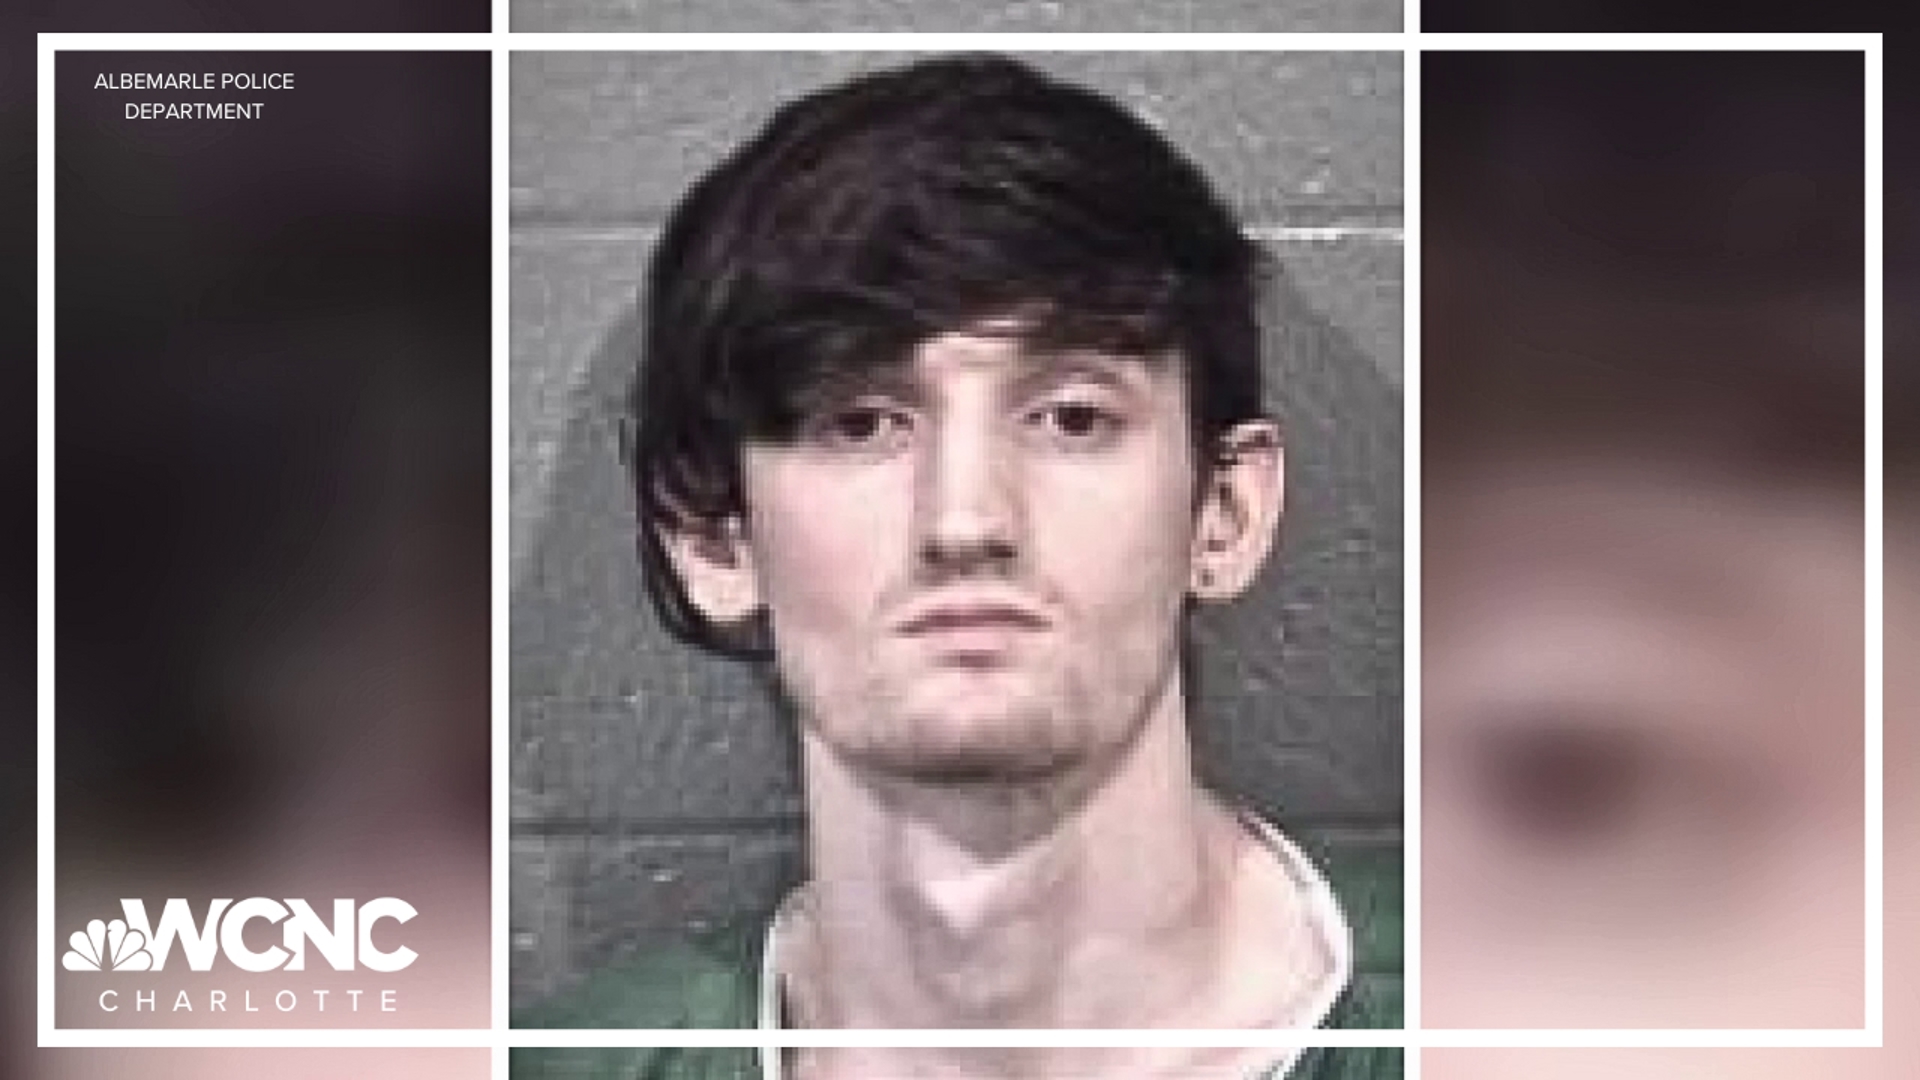 Joshua Biles is facing multiple charges related to the disappearance and death of 17-year-old Baylee Carver.